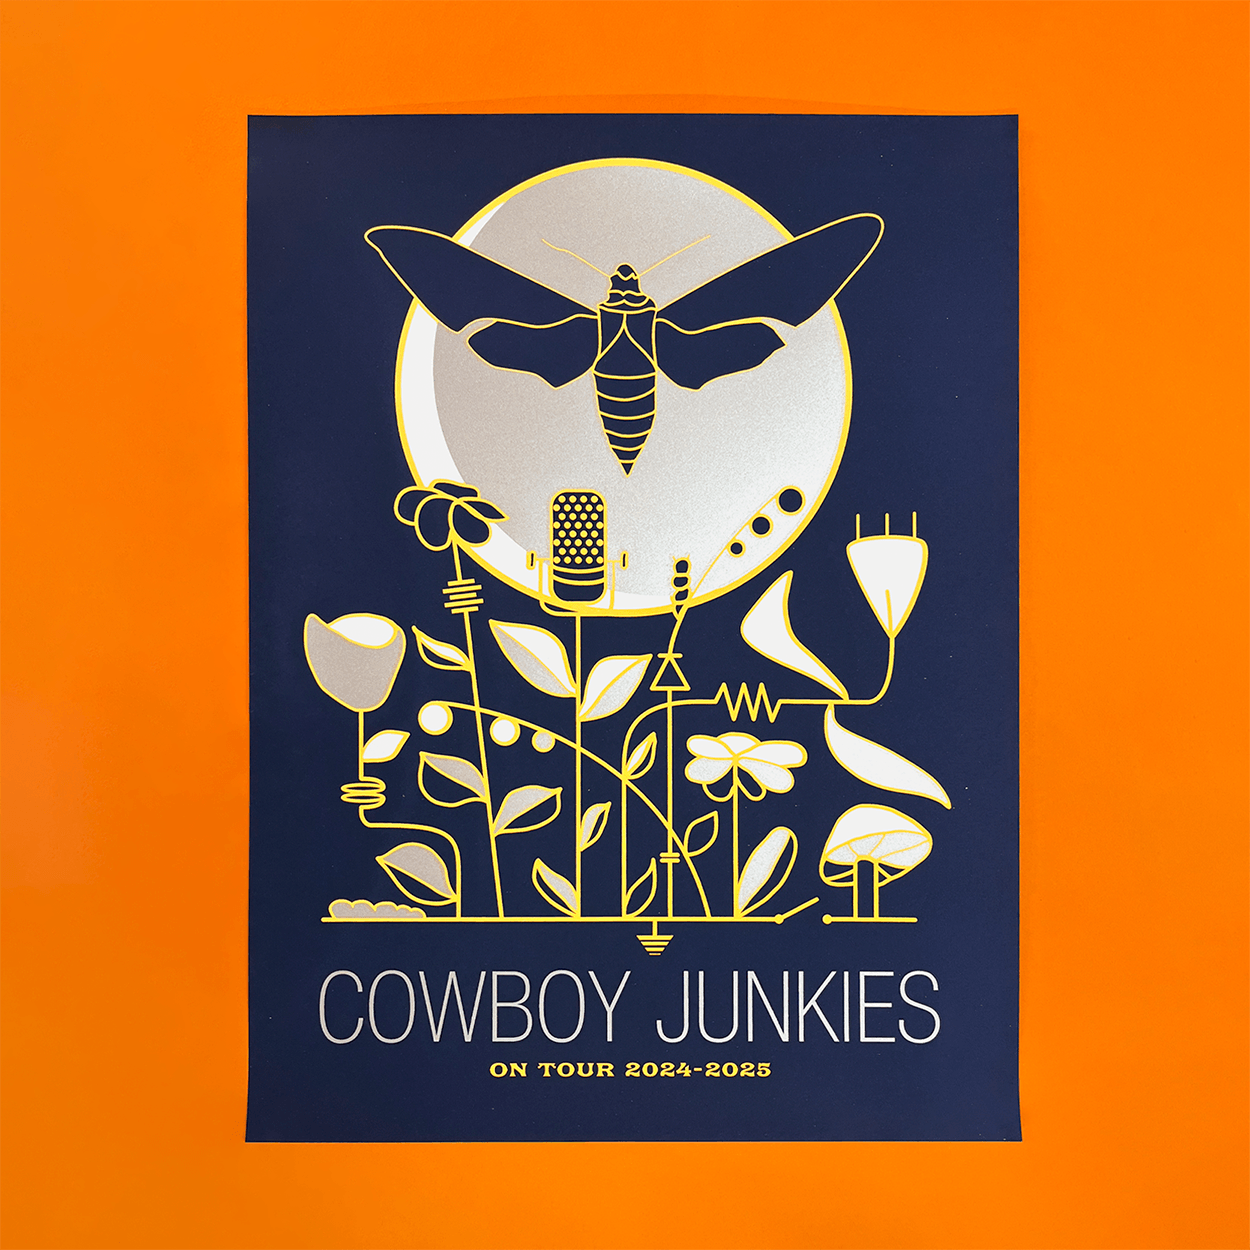 Canadian band Cowboy Junkies 2024 - 2025 tour poster celebrating their album such ferocious beauty, screen printed by Kid Icarus in their Toronto studio